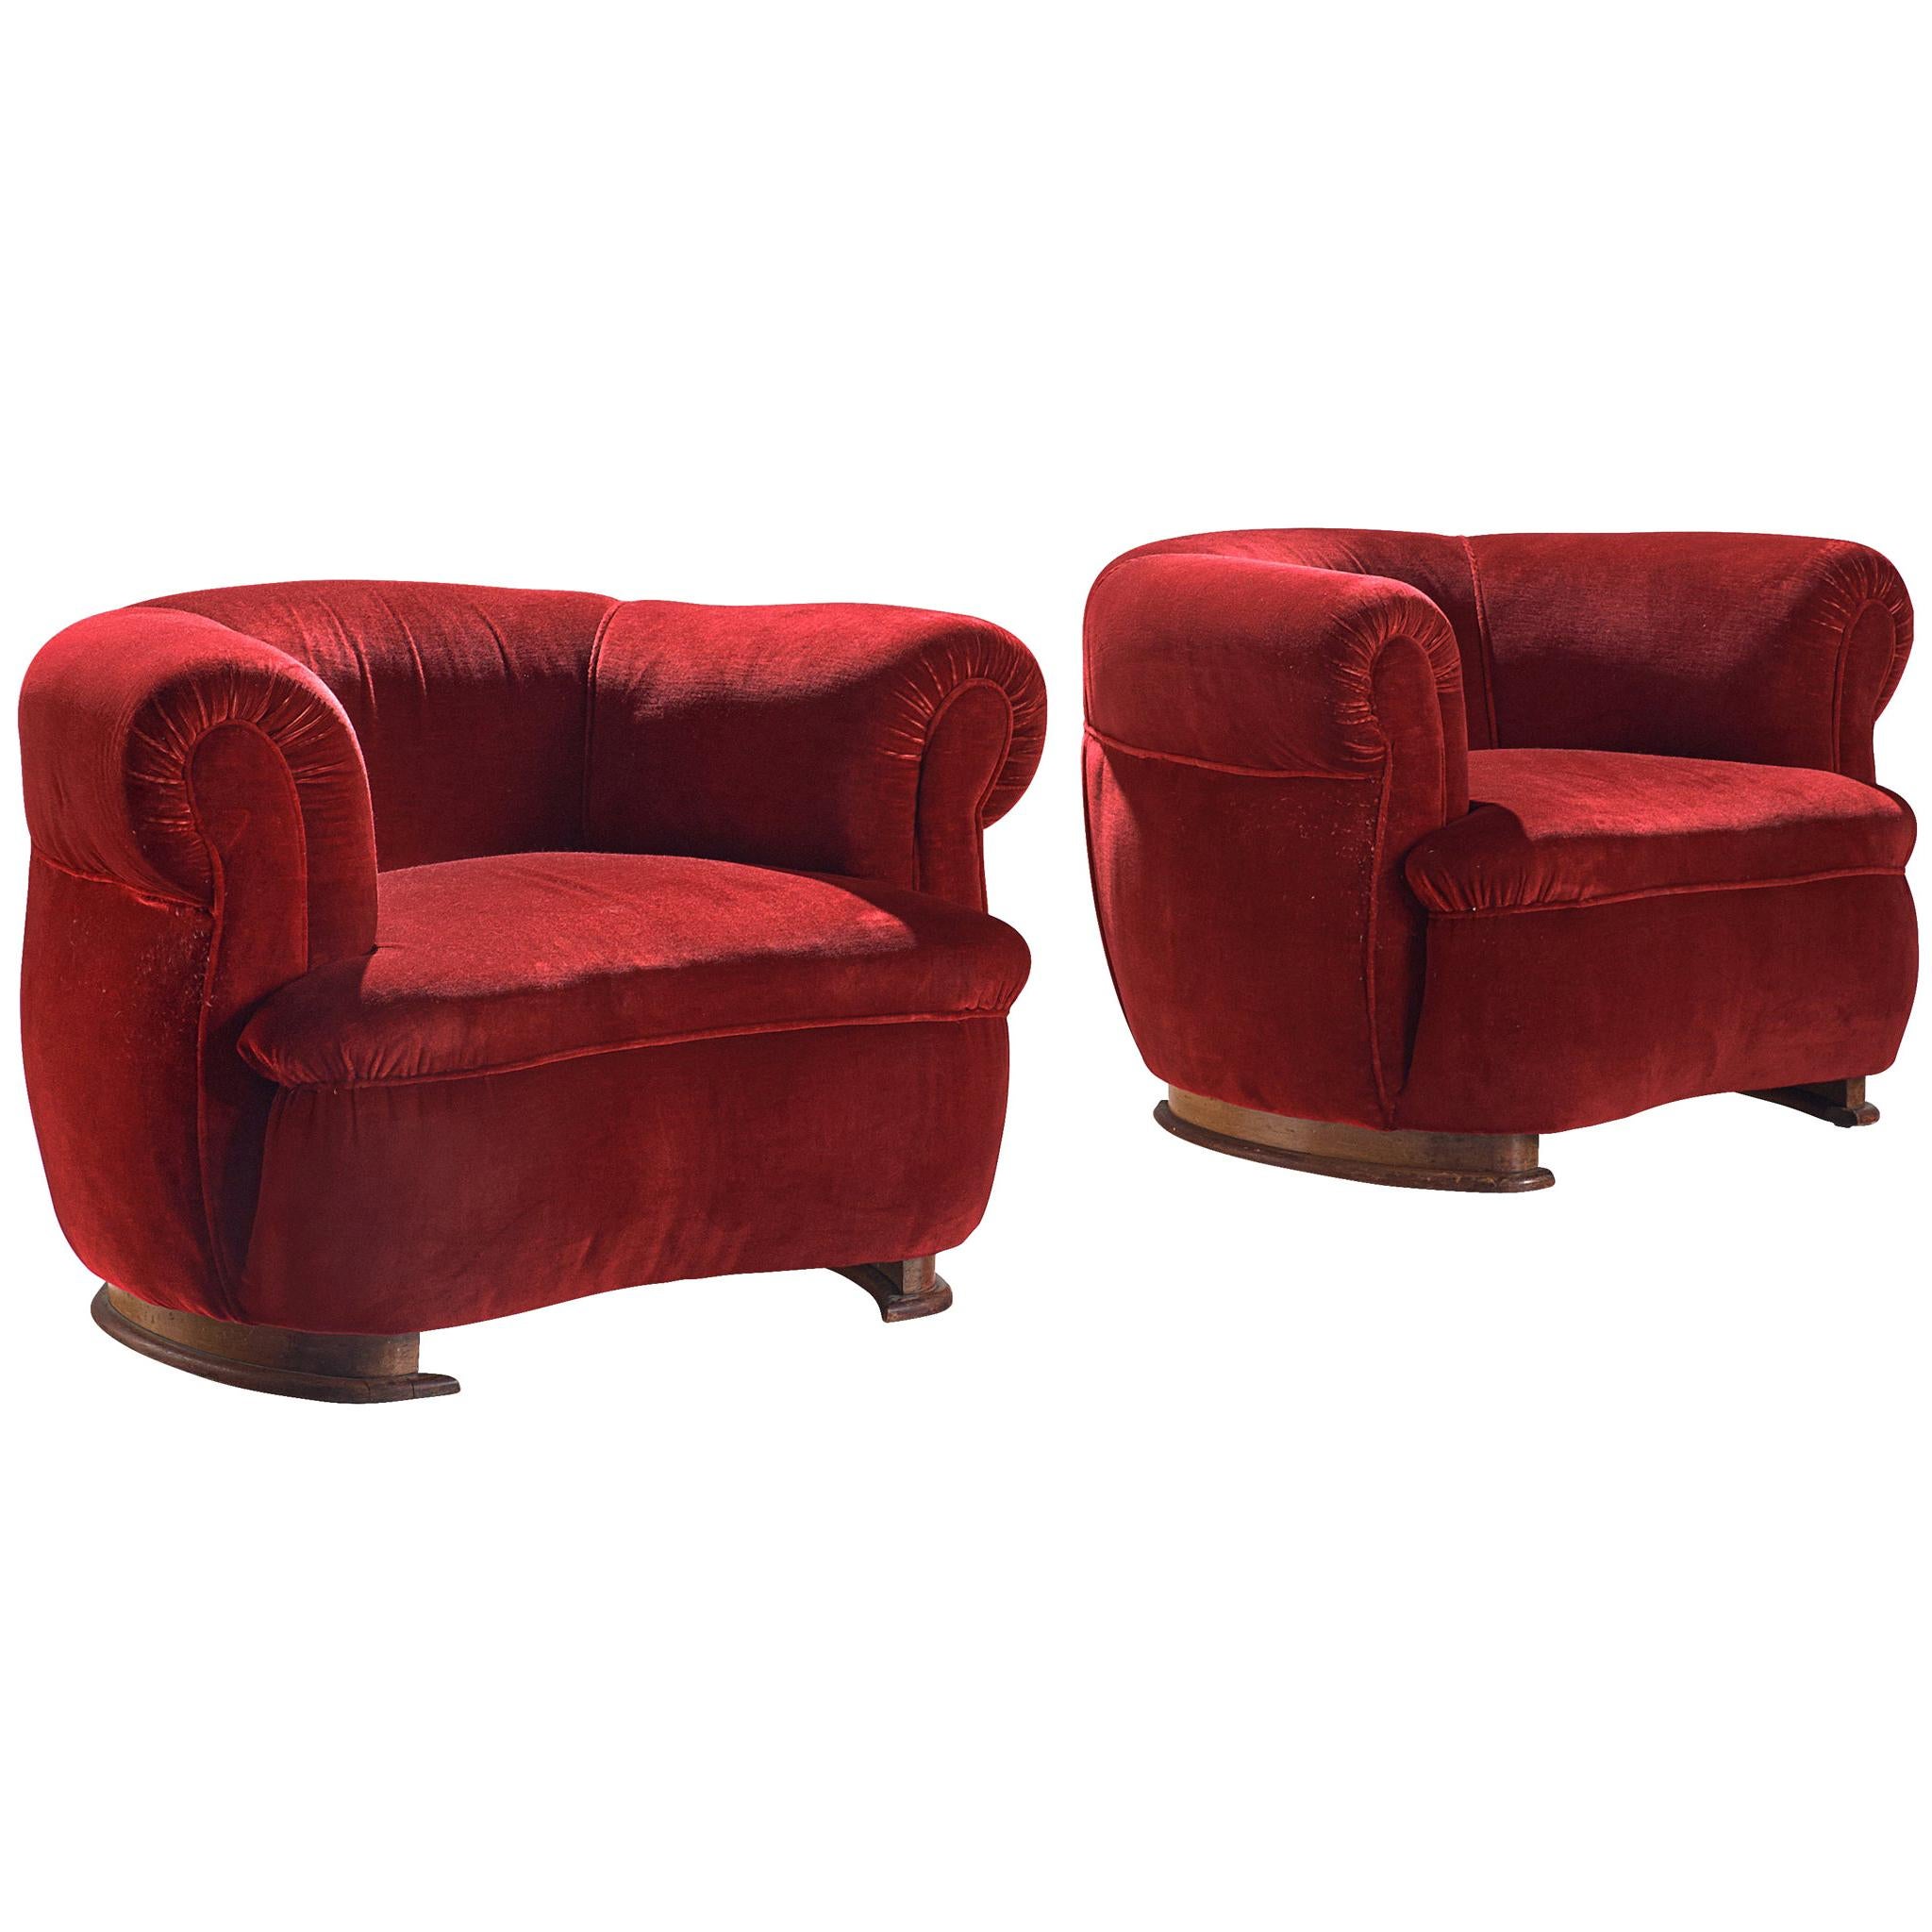 French Art Deco Lounge Chairs in Red Velvet Upholstery